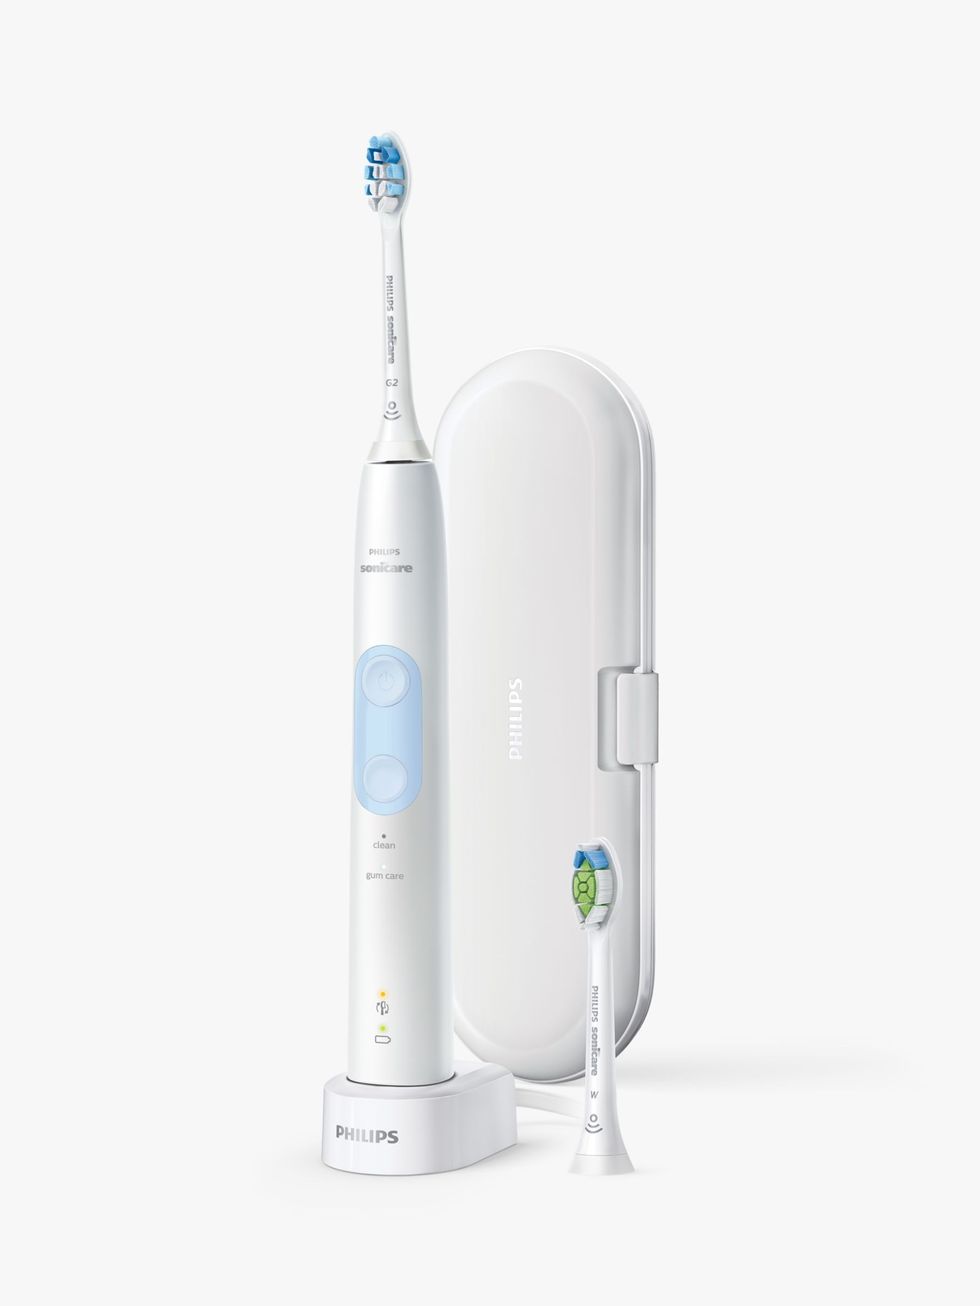 Sonicare ProtectiveClean Electric Toothbrush